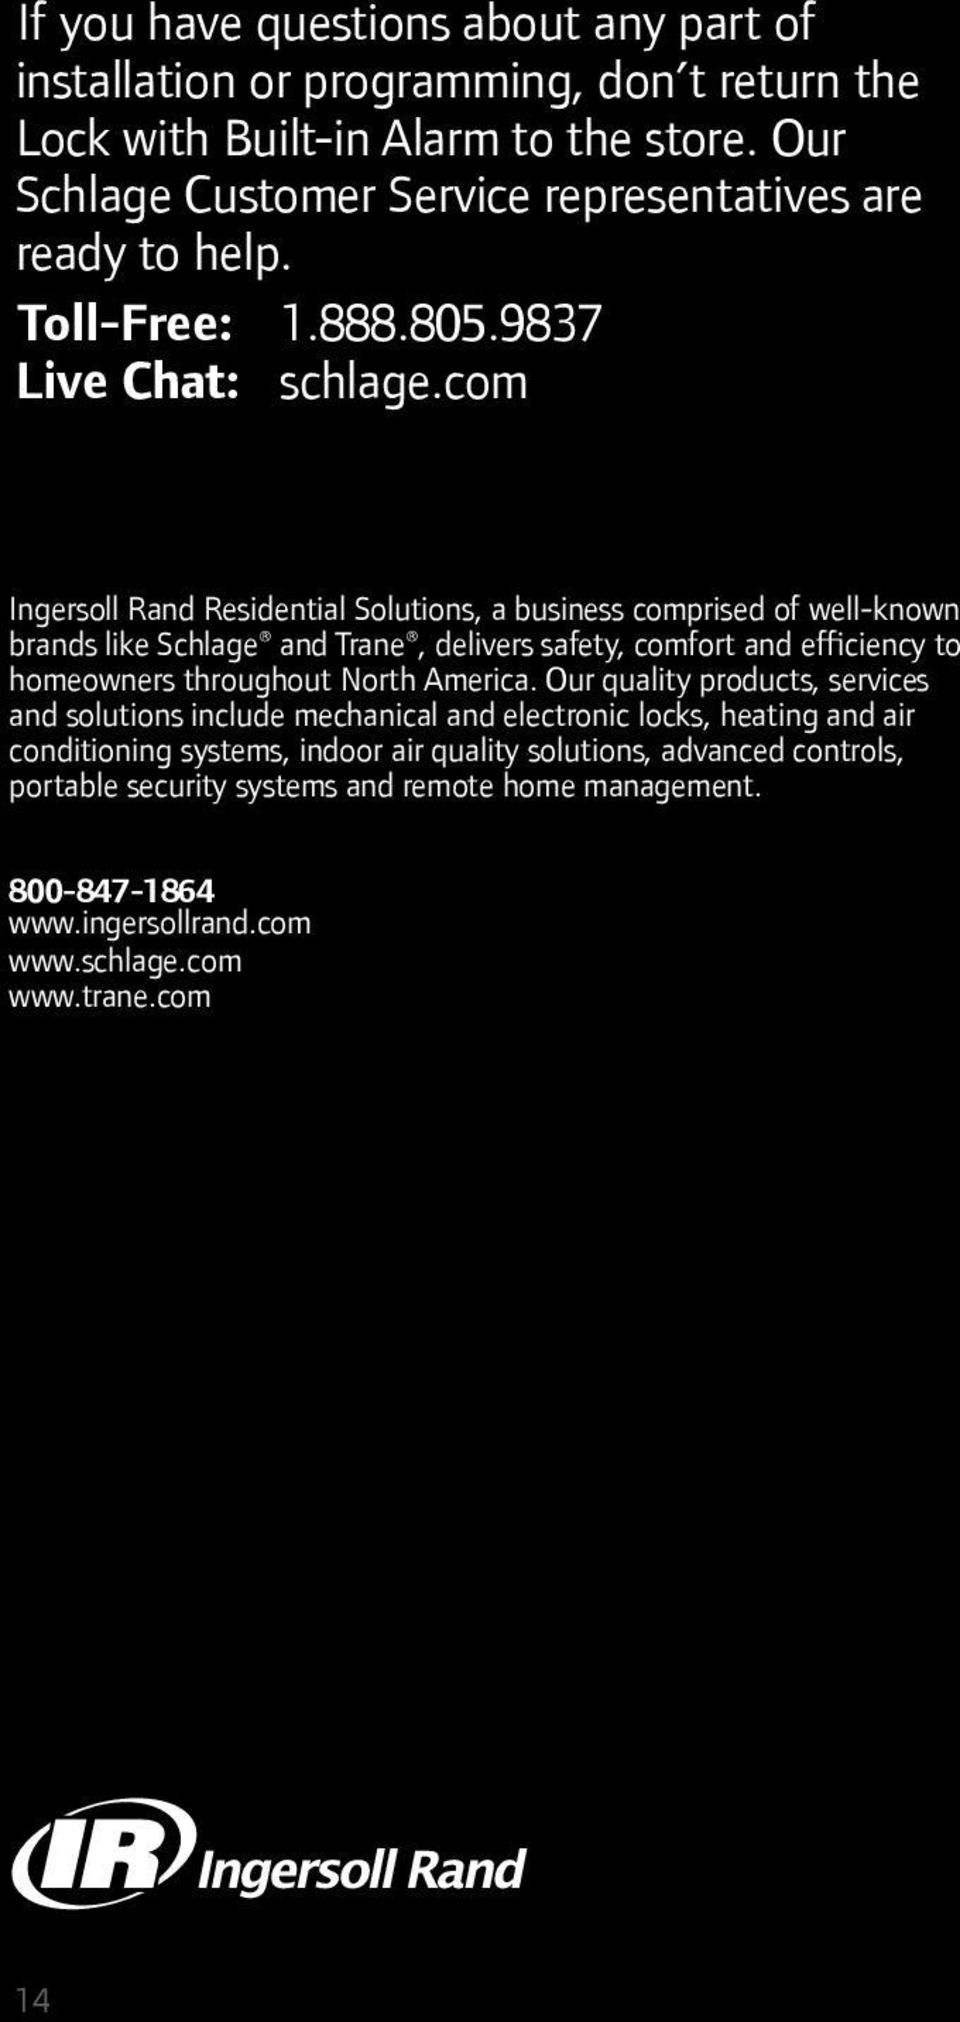 com Ingersoll Rand Residential Solutions, a business comprised of well-known brands like Schlage and Trane, delivers safety, comfort and efficiency to homeowners throughout North